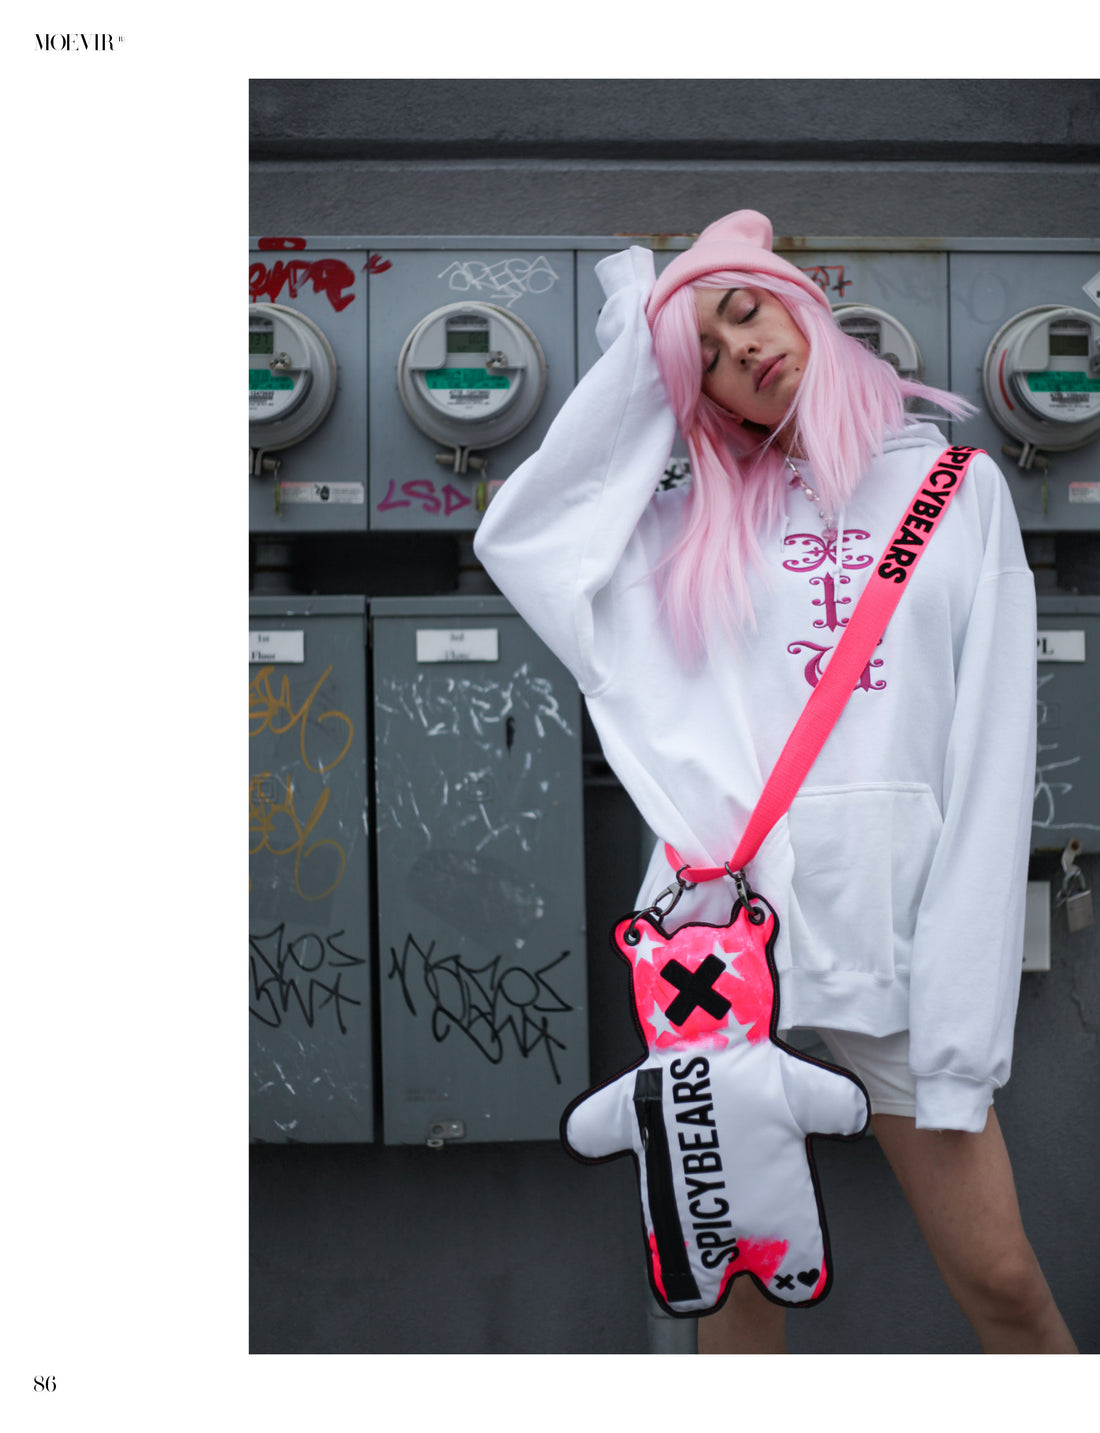 NYC style look. Spicy Bear Bag. White and neon pink crossbody urban style bag. Moevir Magazine